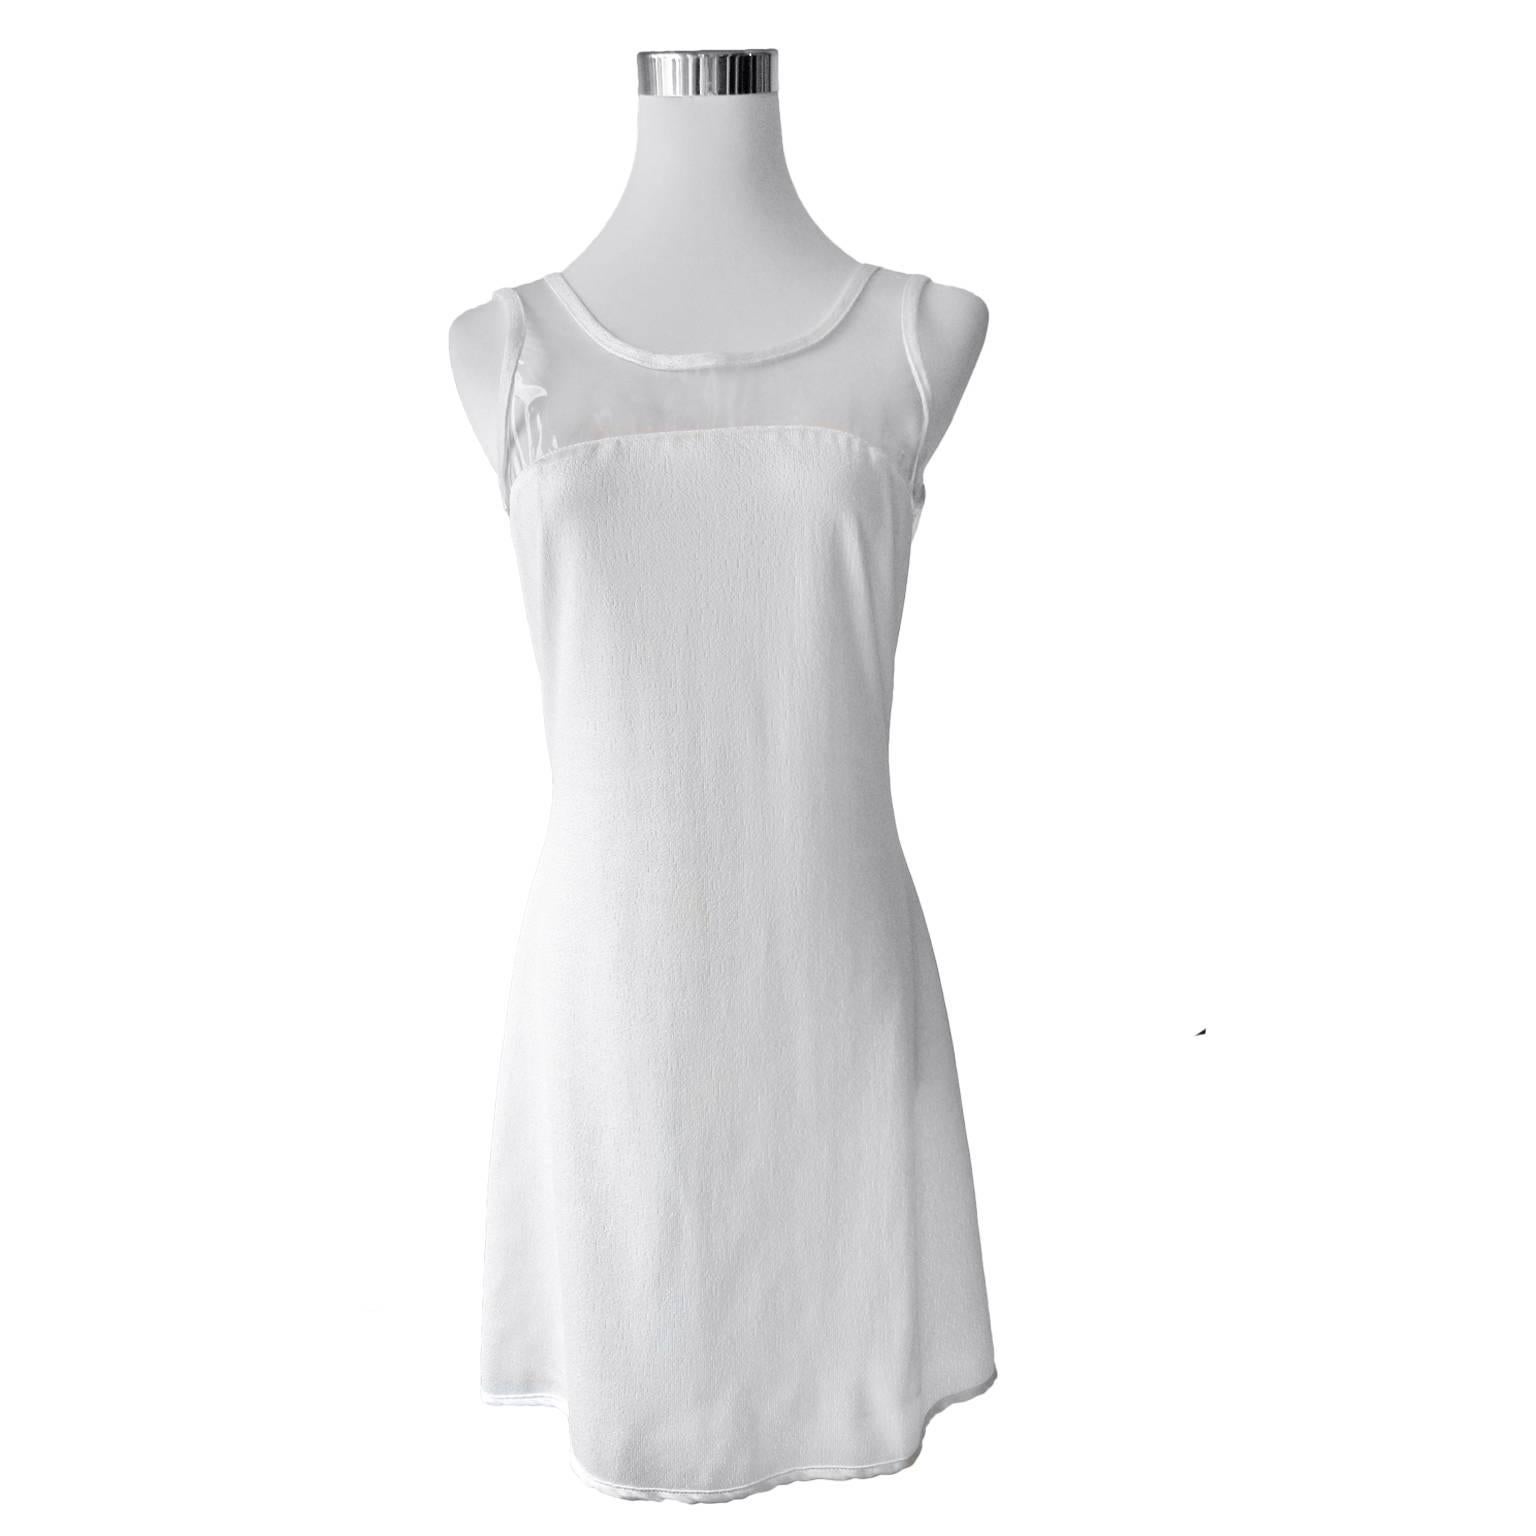 Versus Gianni Versace white dress from 90s. Clear vinyl front / back shoulder detail with piping.
Size : 42 (IT), 6 (US) 
Shoulder to hem length : 83 cm 
